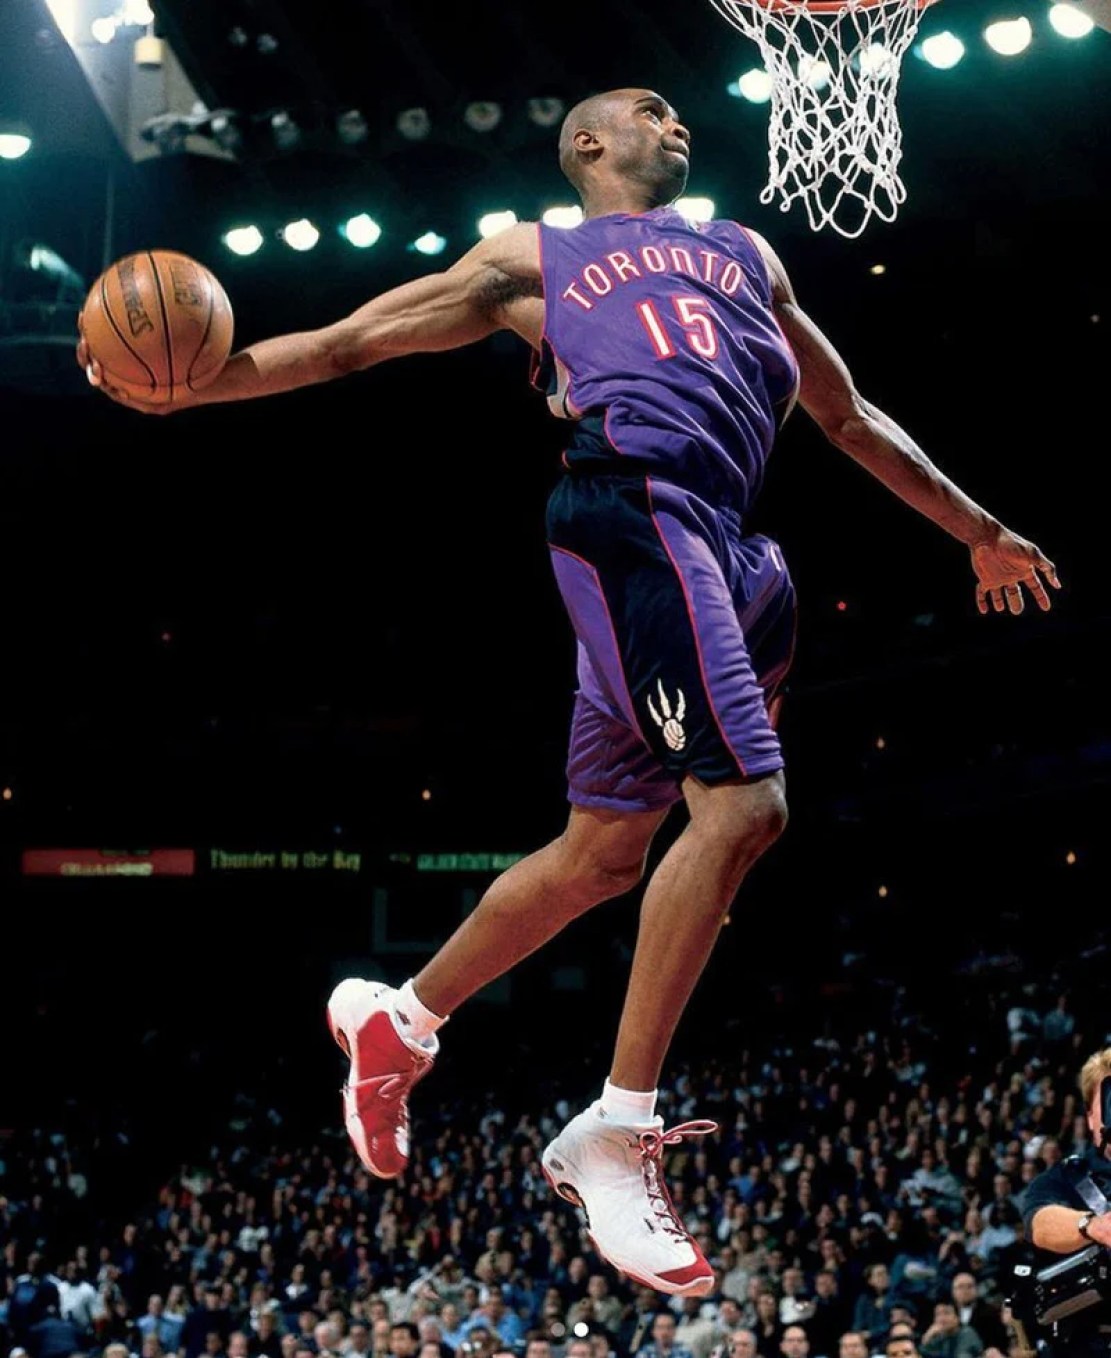 AND-1-Tai-Chi-Vince-Carter.jpg